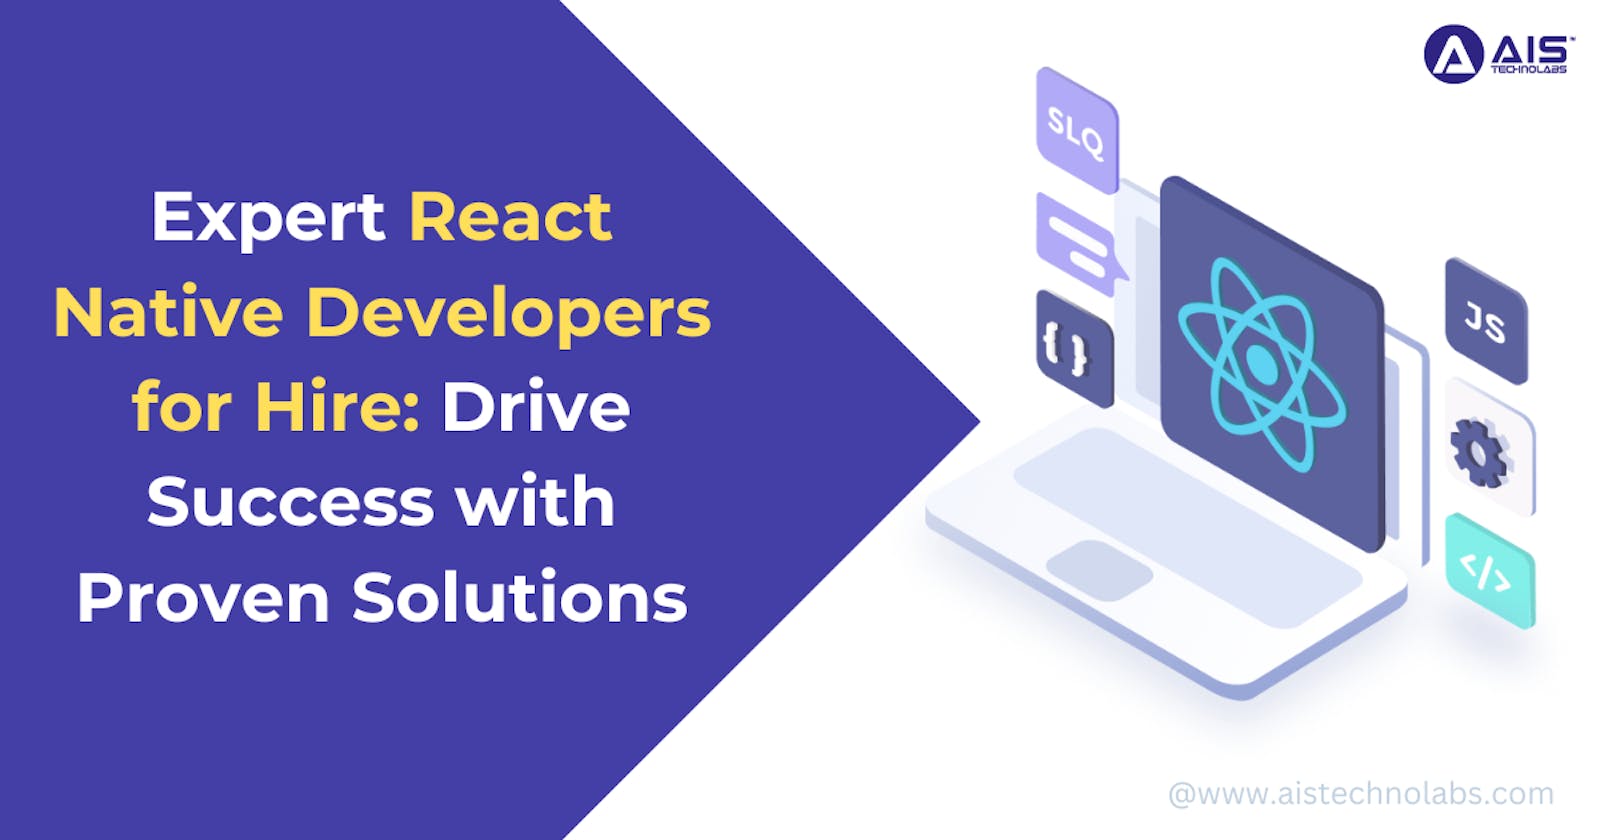 Expert React Native Developers for Hire: Drive Success with Proven Solutions